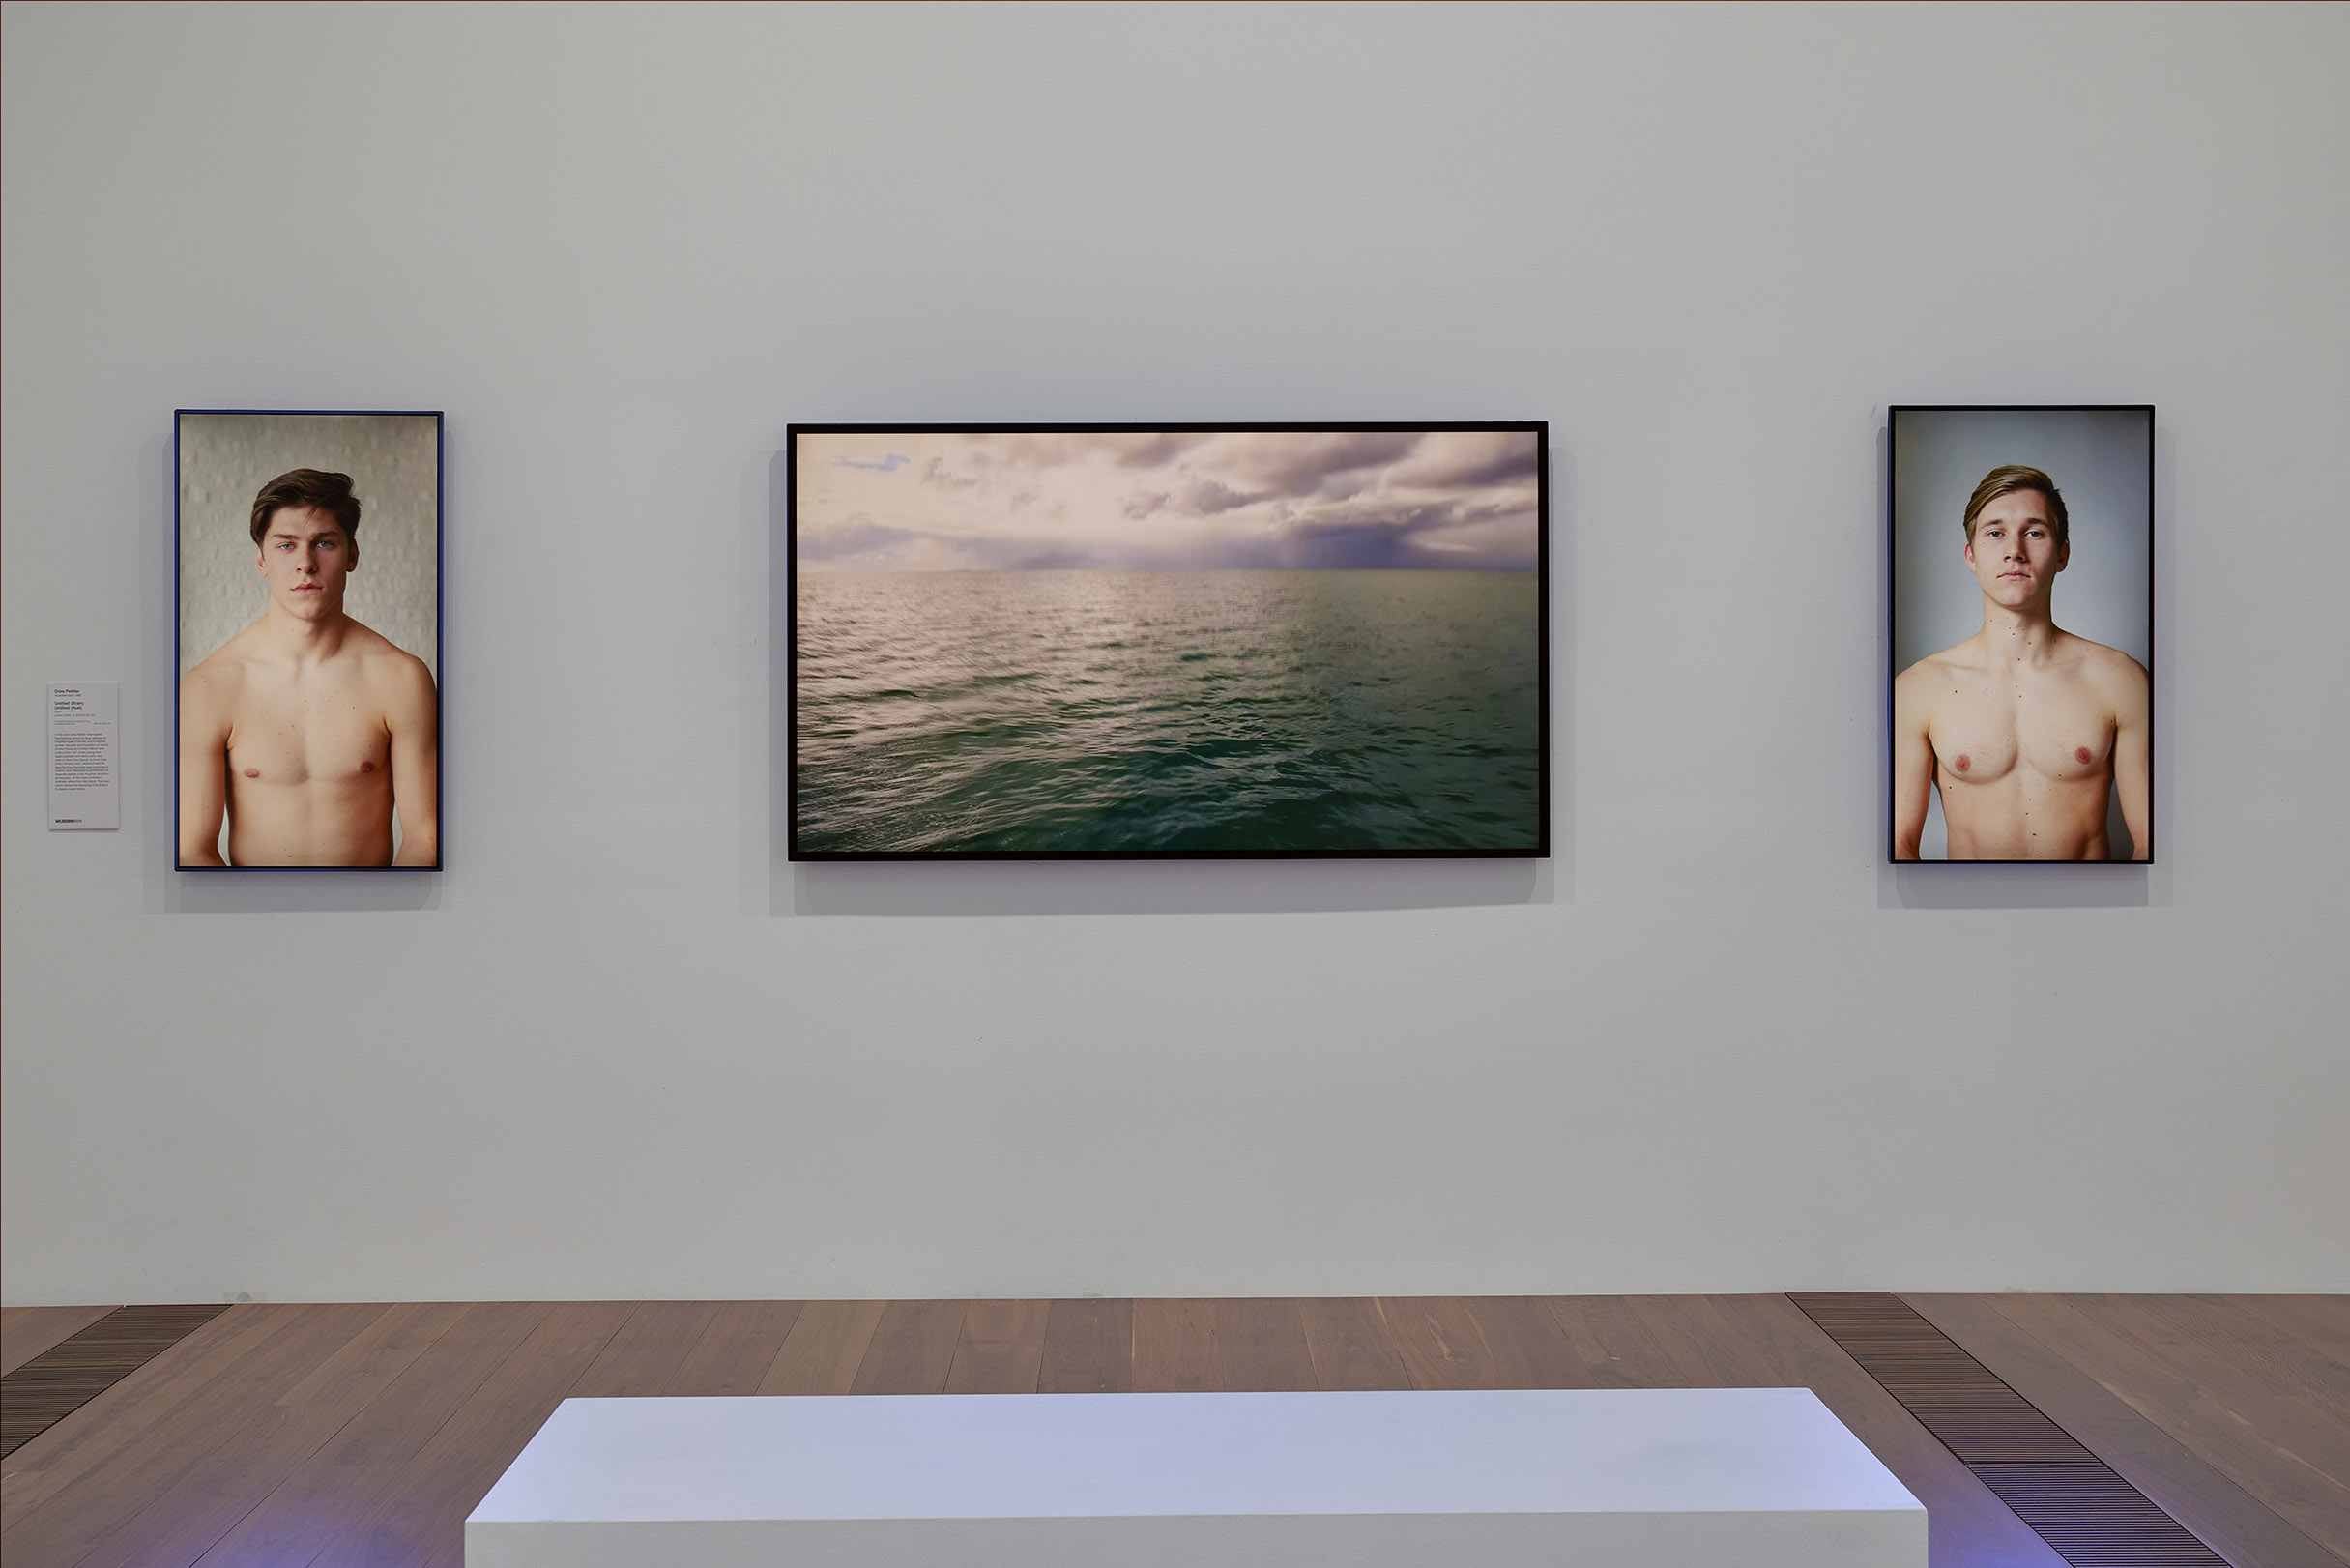 Installation view of Drew Pettifer’s Untitled (Ruel) and Untitled (Bram), 2020 on display as part of the Melbourne Now exhibition at The Ian Potter Centre: NGV Australia, Melbourne from 24 March to 20 August 2023. Photo: Sean Fennesy